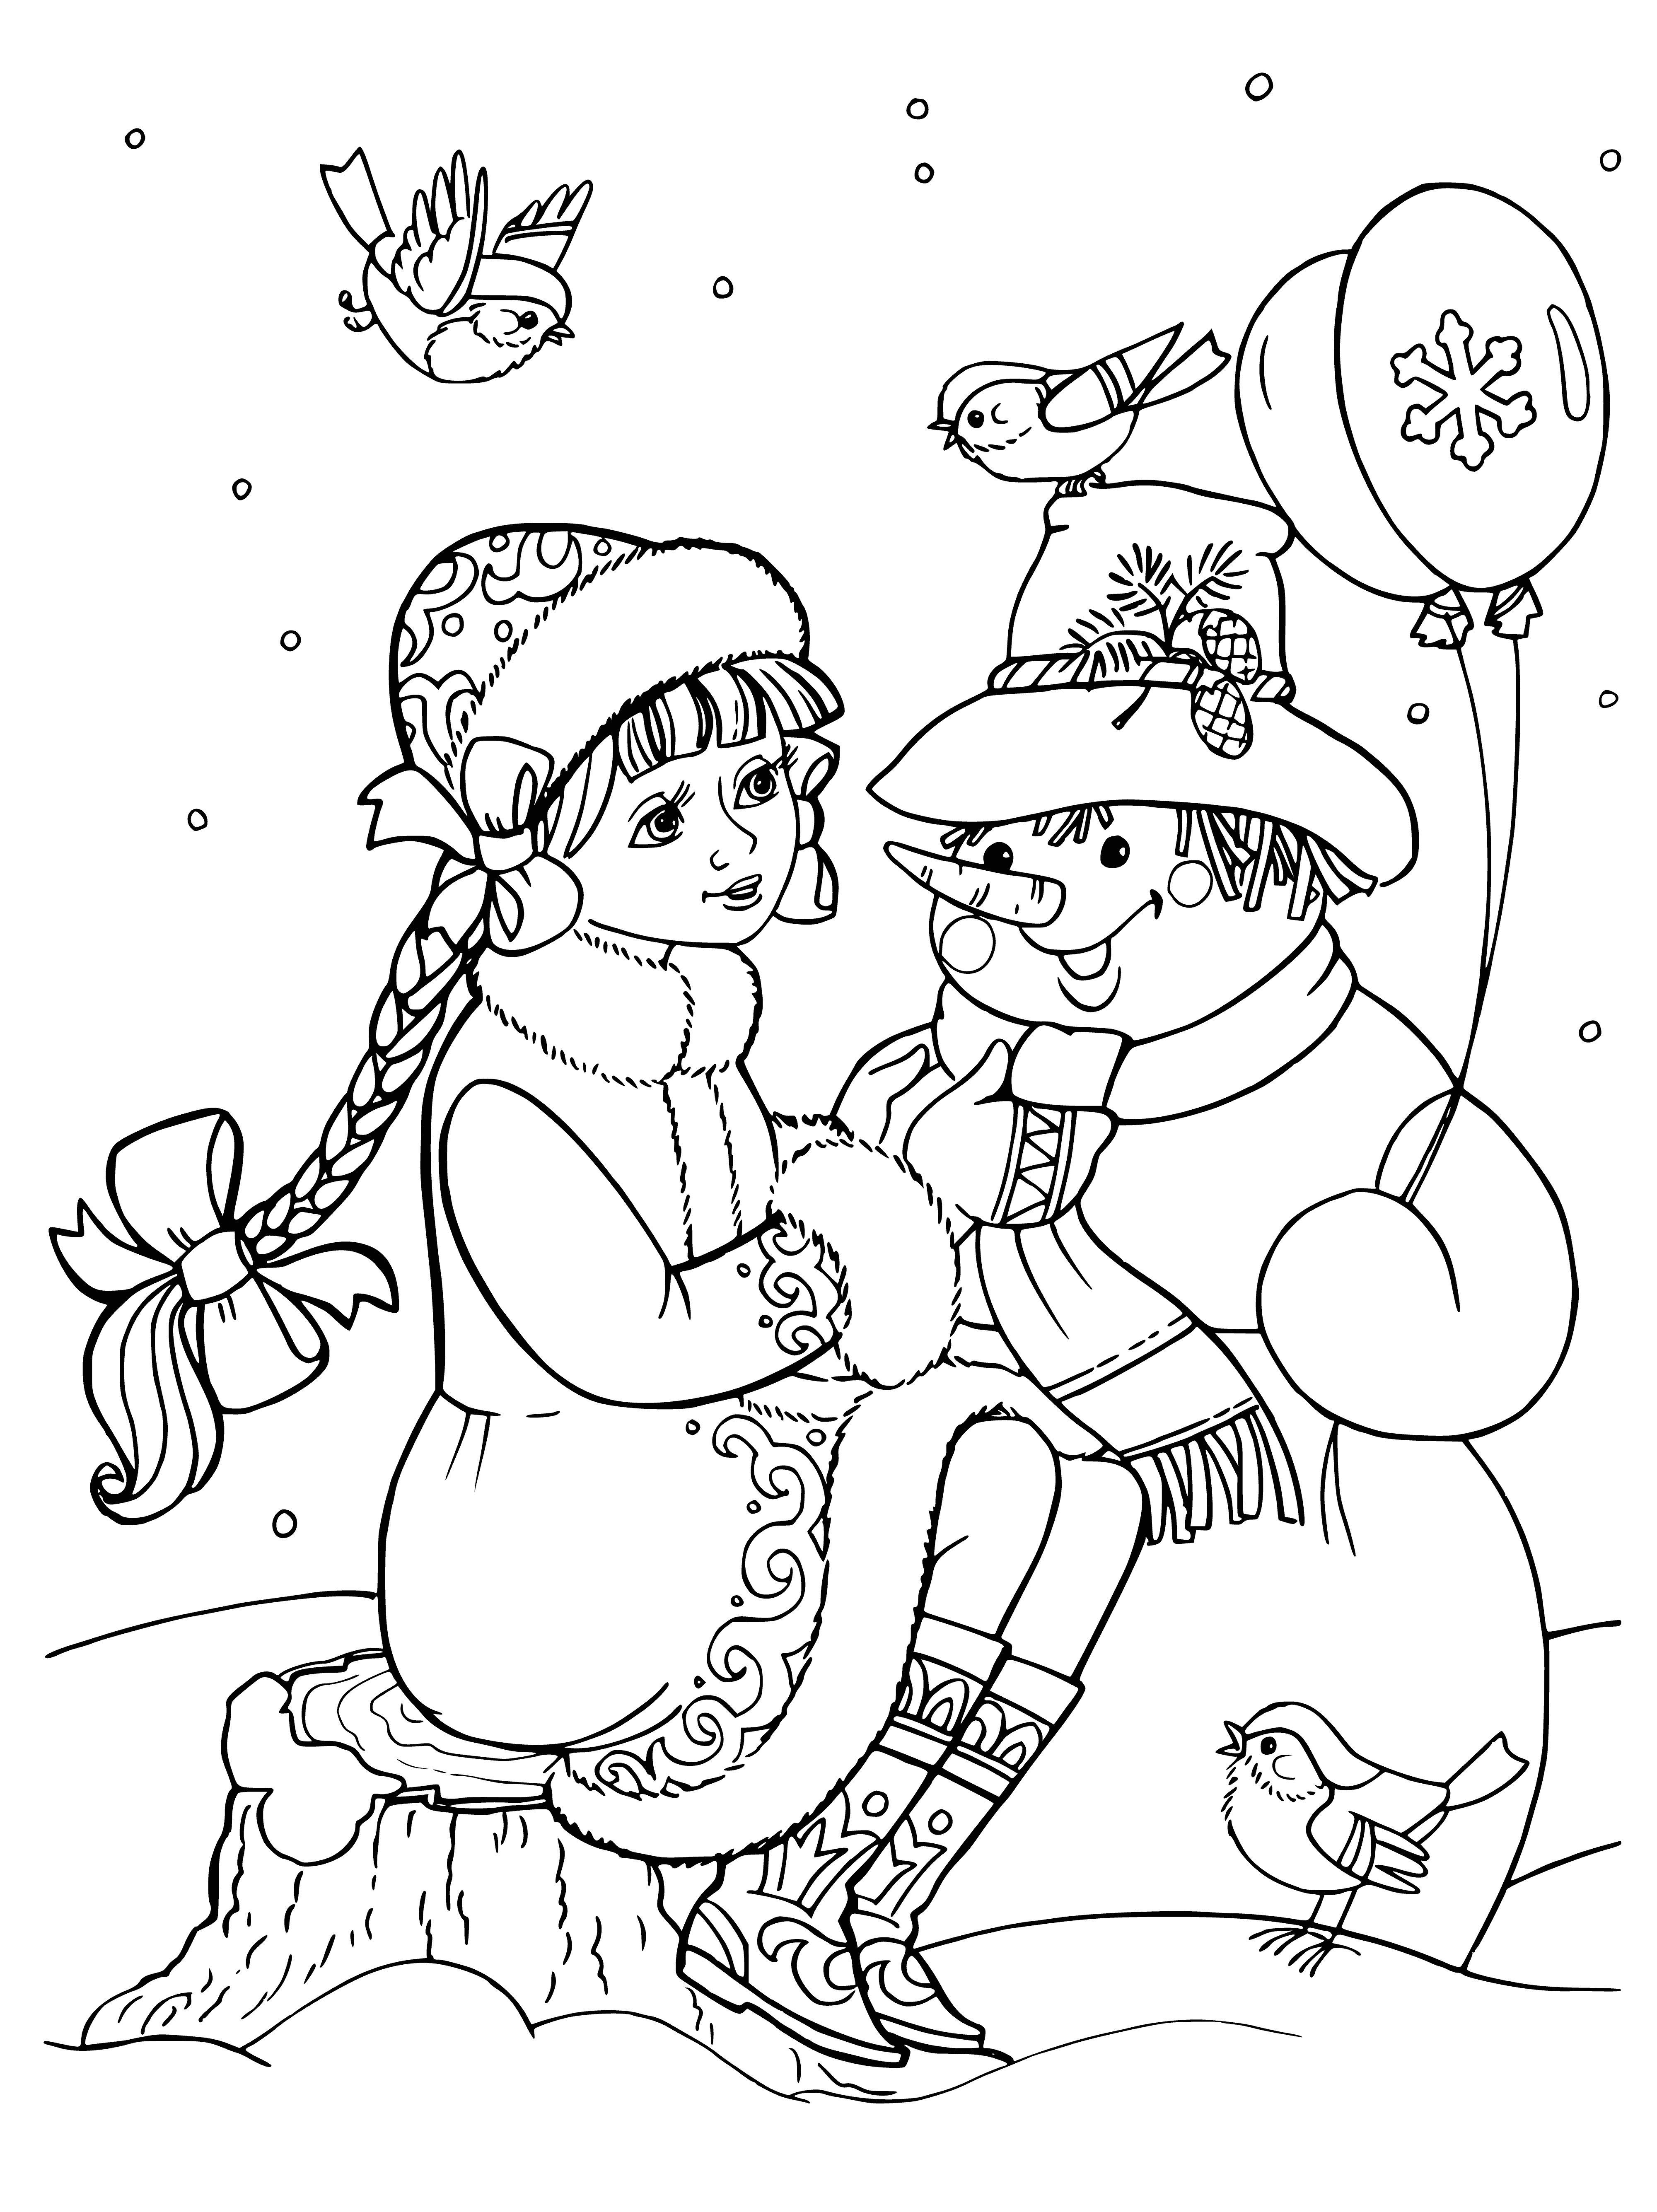 Girl decorates snowman with black scarf, hat & broom in coloring page.